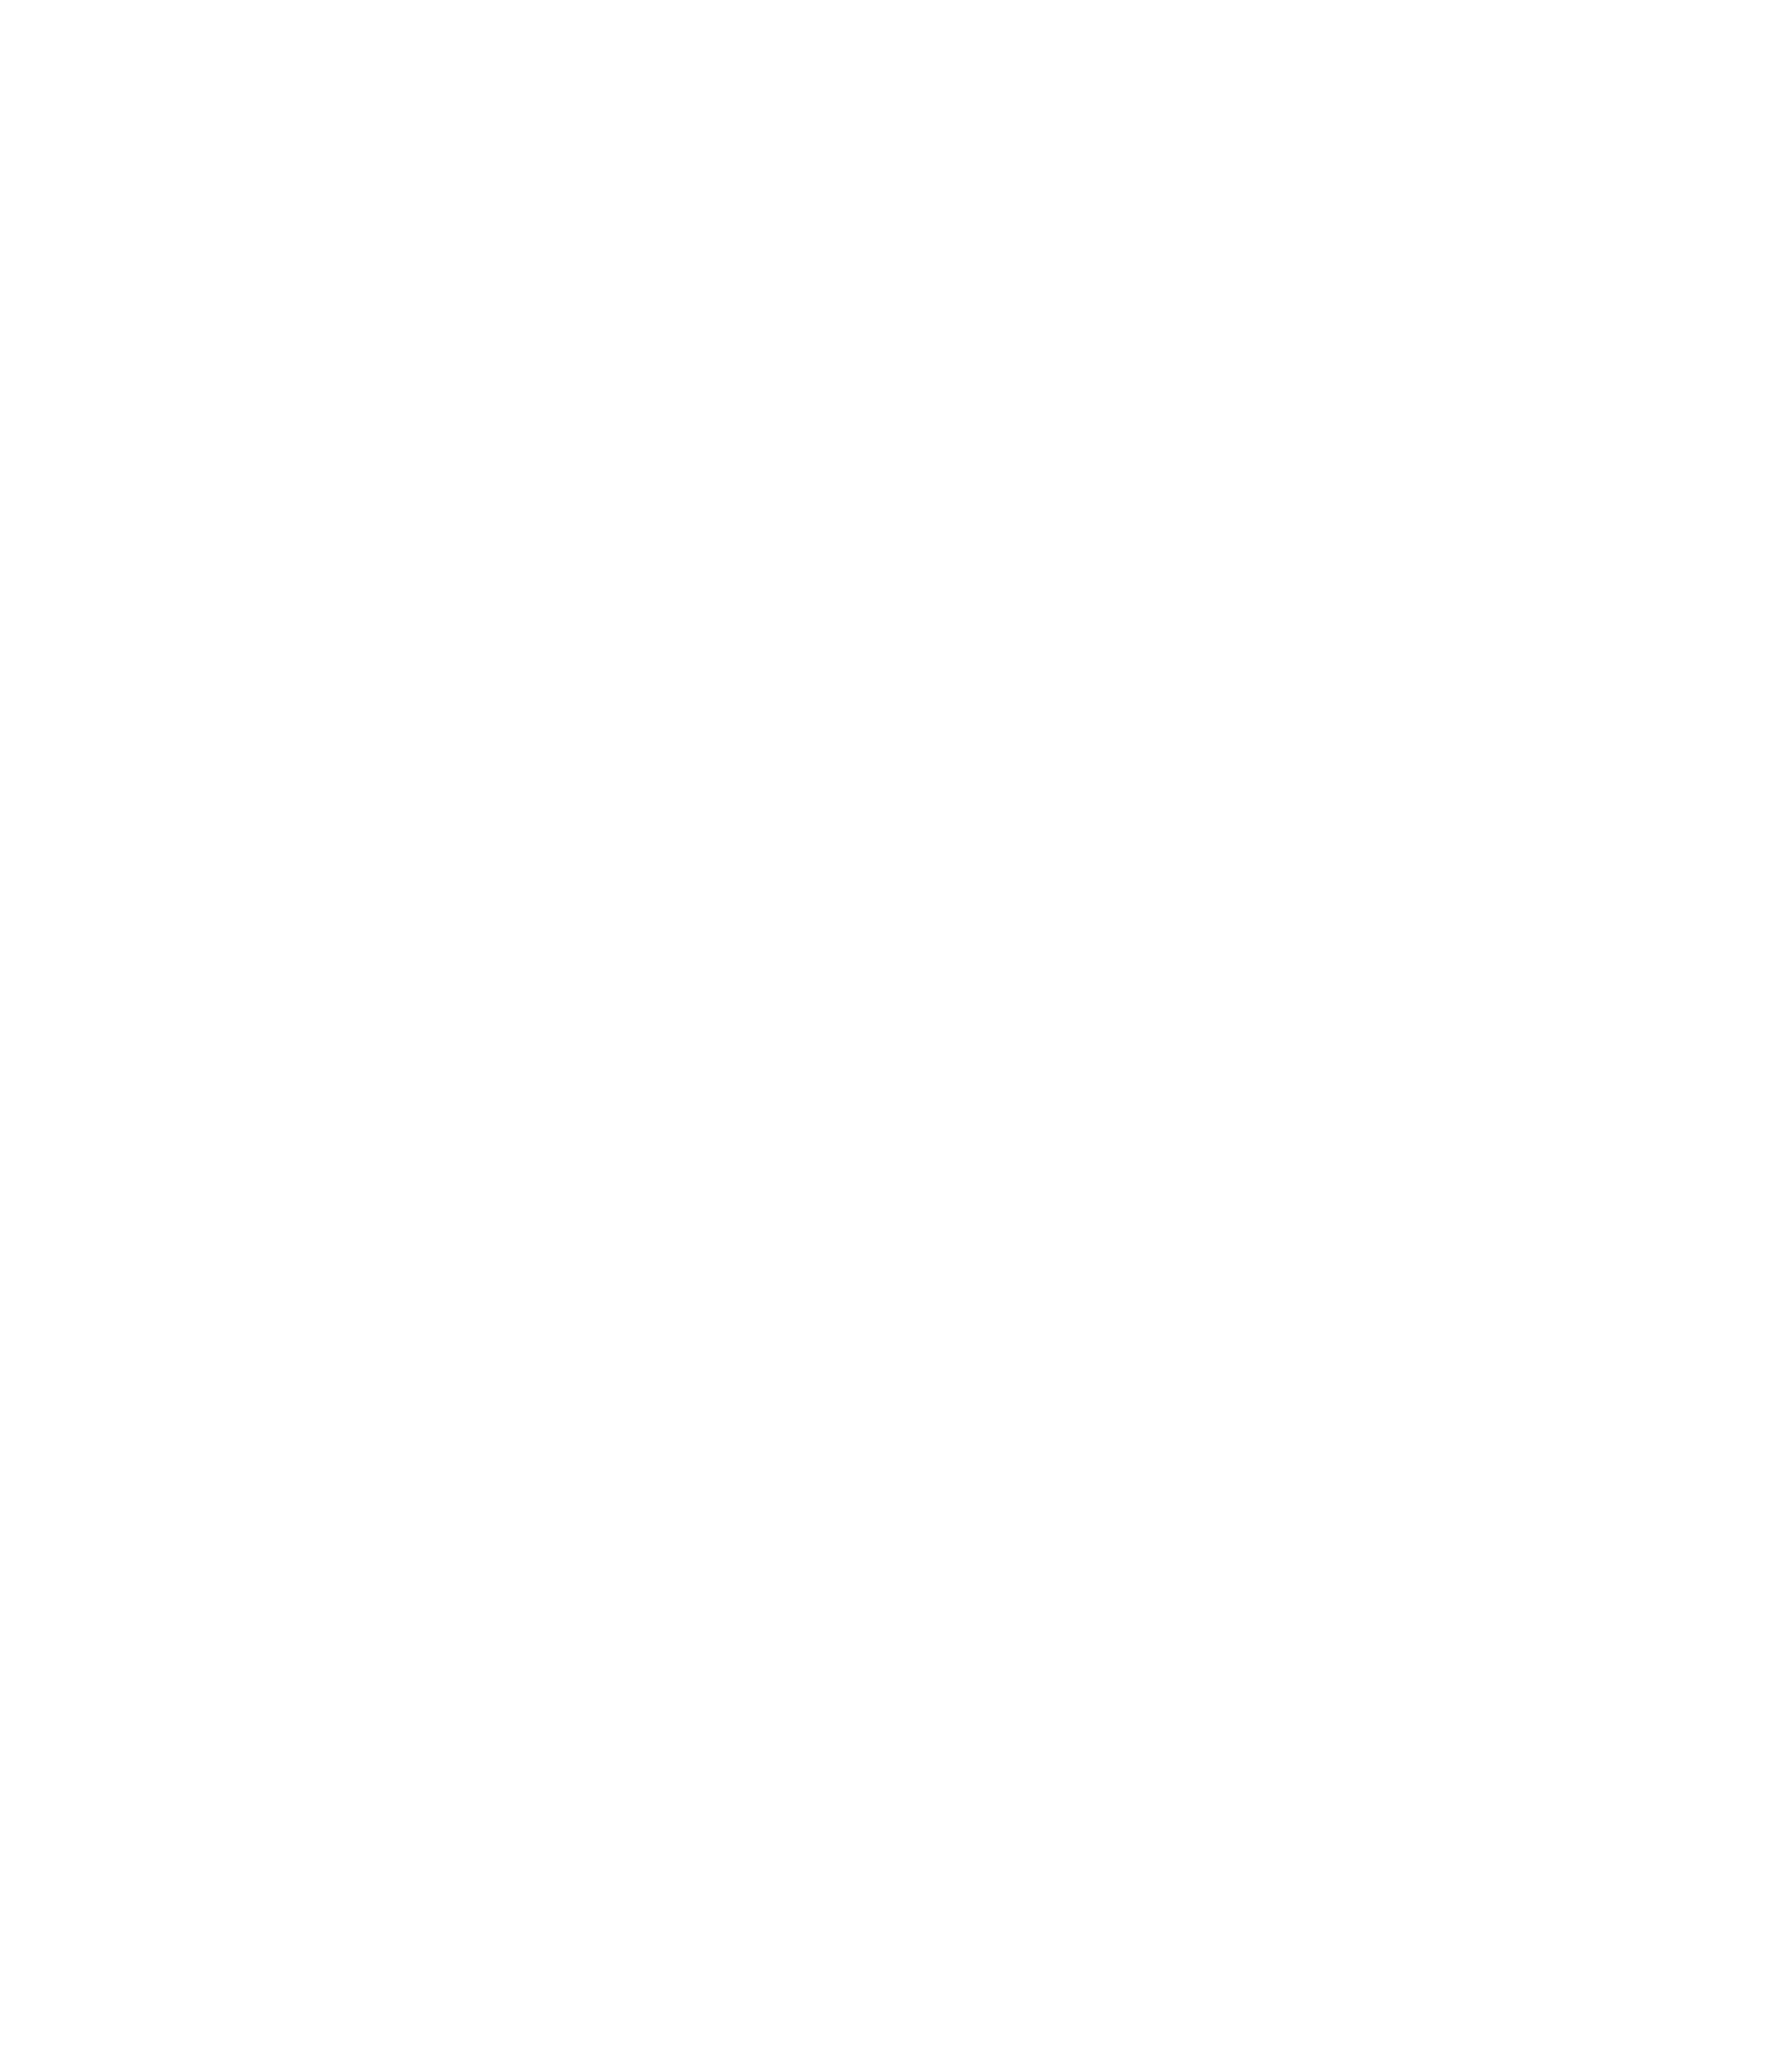 The Kindred logo